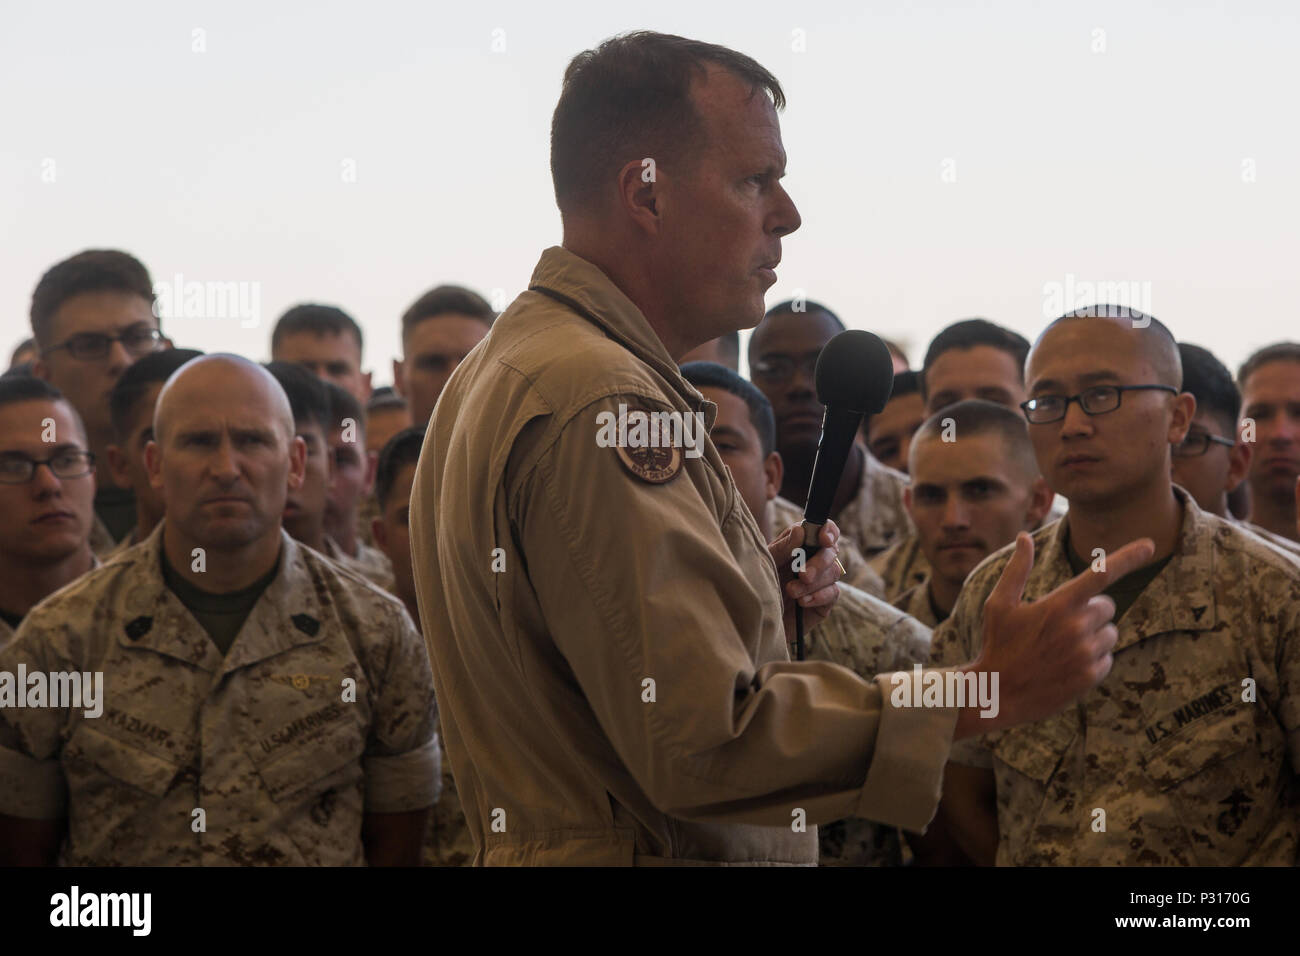 Sergeant Major of the Marine Corps visits 3rd MAW